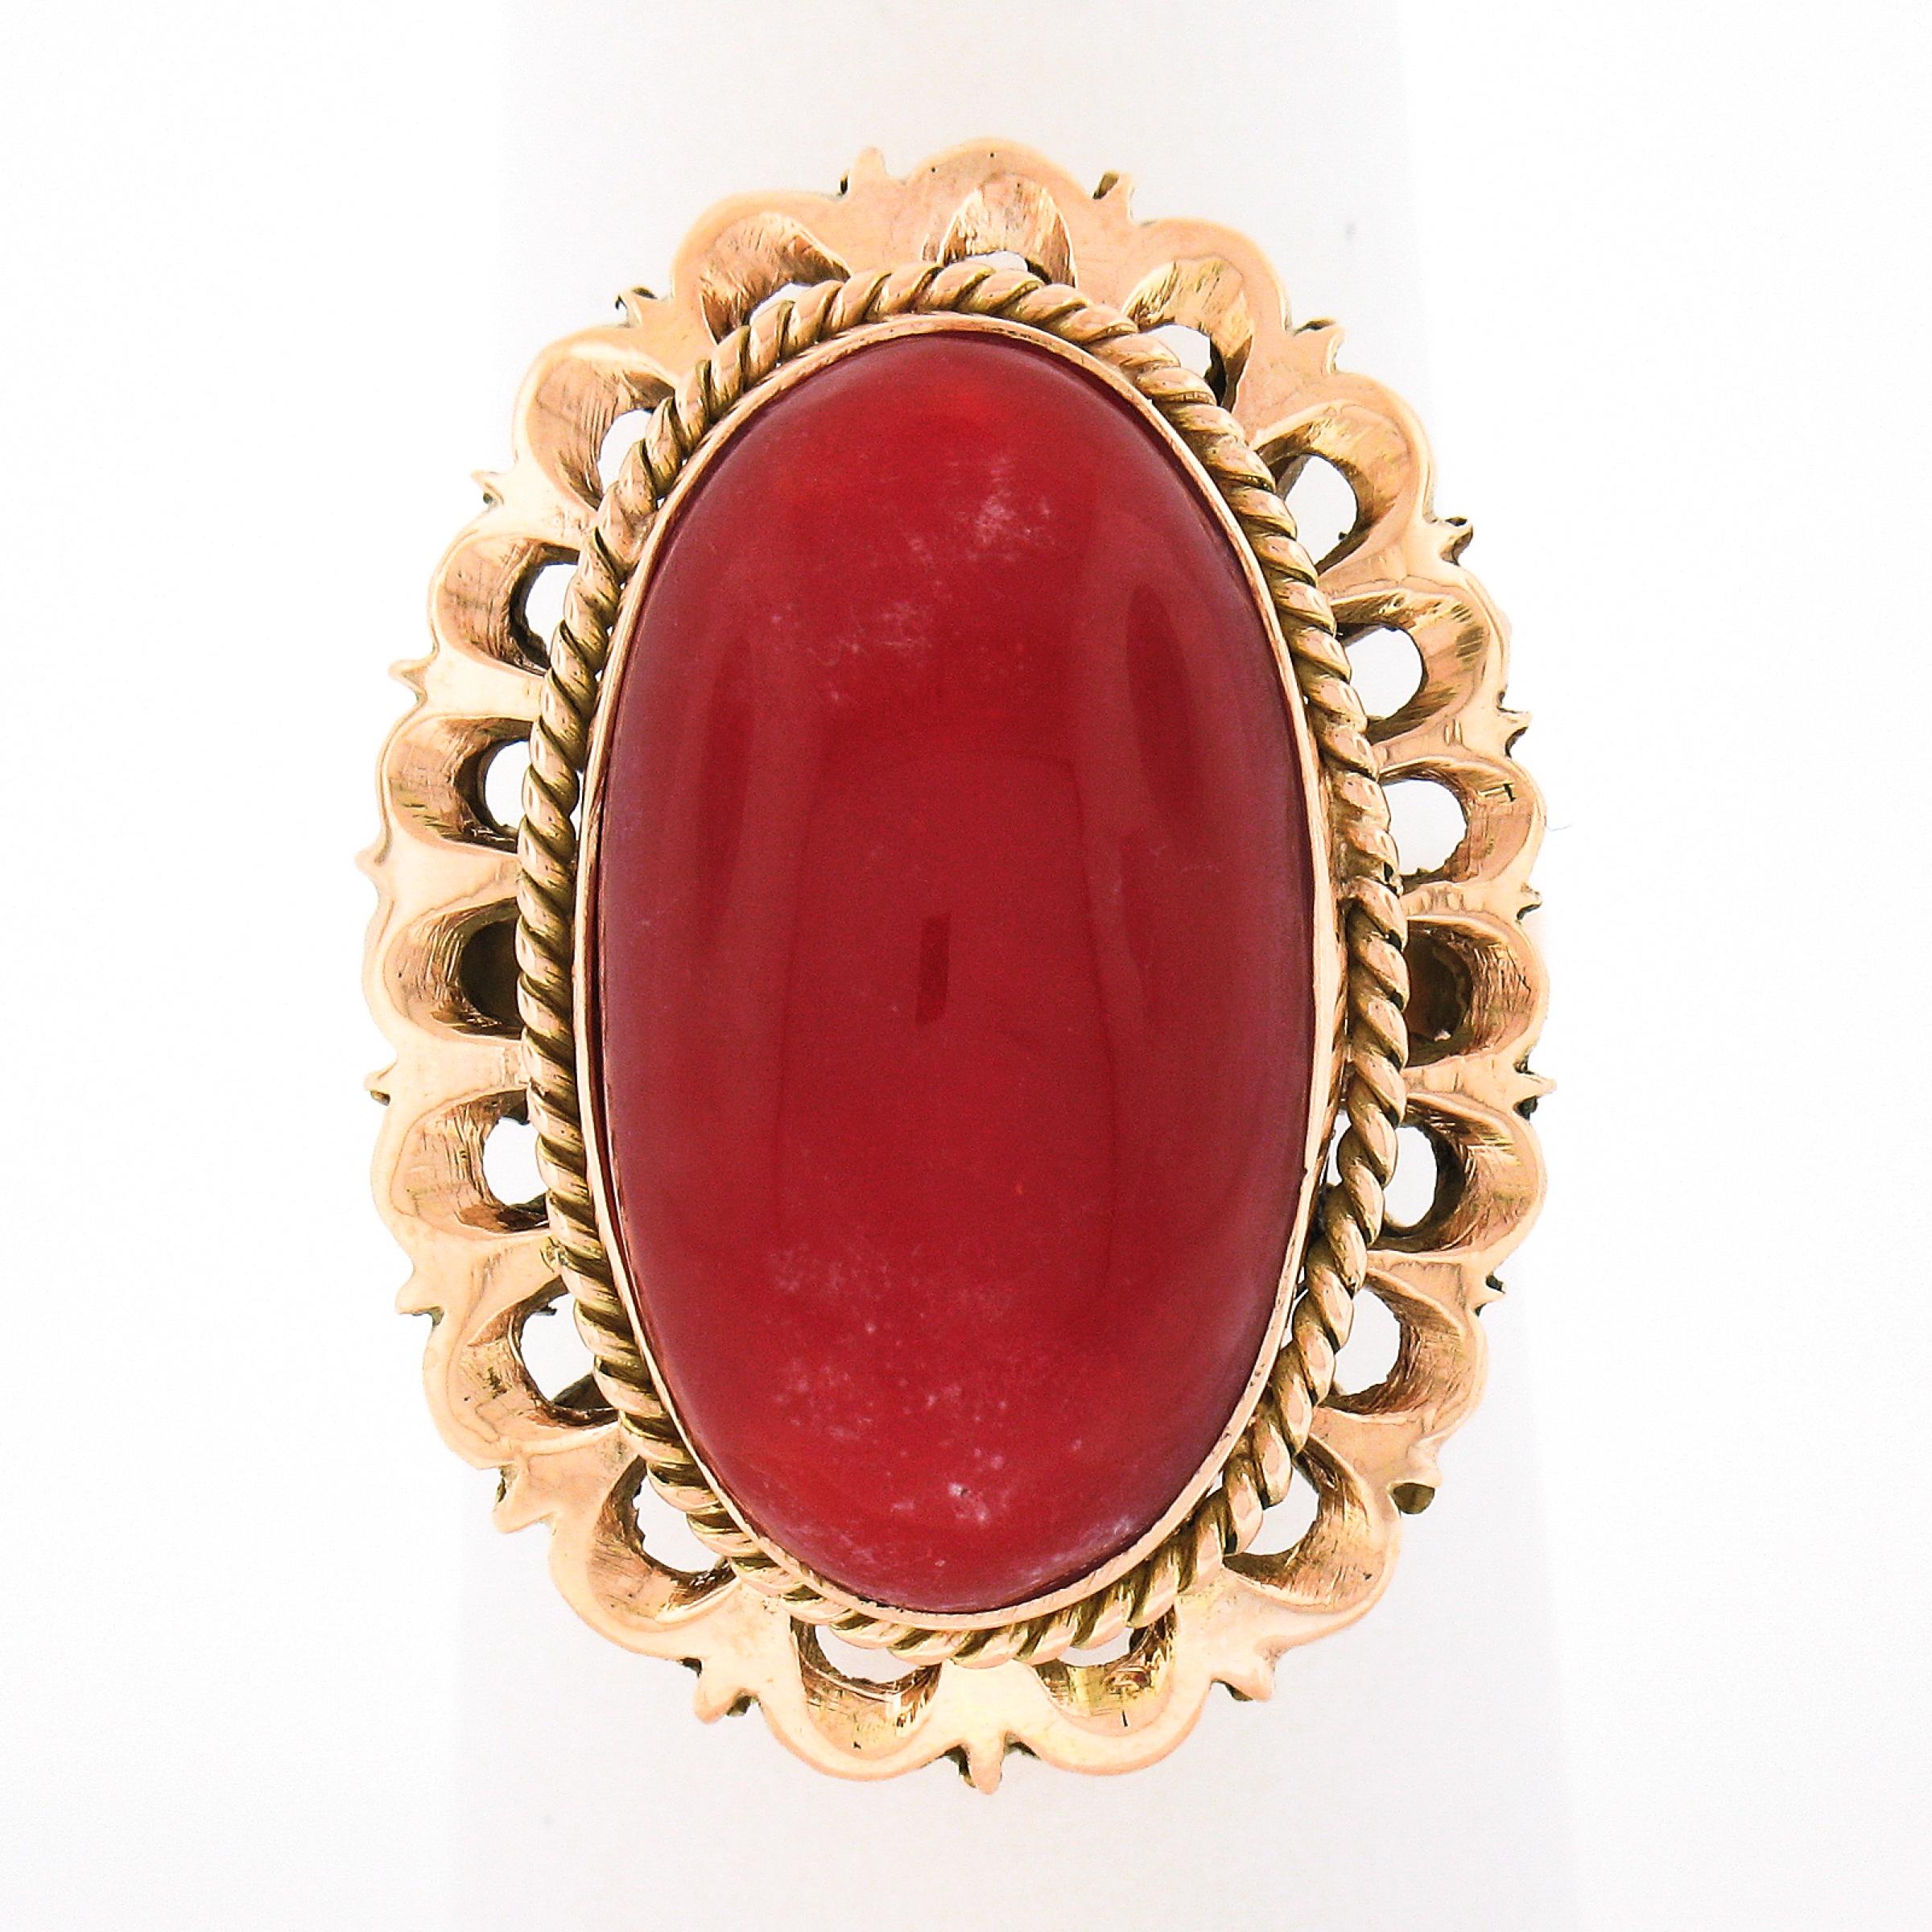 Here we have an absolutely beautiful vintage ring that is crafted from solid 18k gold featuring a fine coral stone neatly bezel set at its center. This elongated oval cabochon coral is GIA certified, showing a truly gorgeous and intense orangy-red